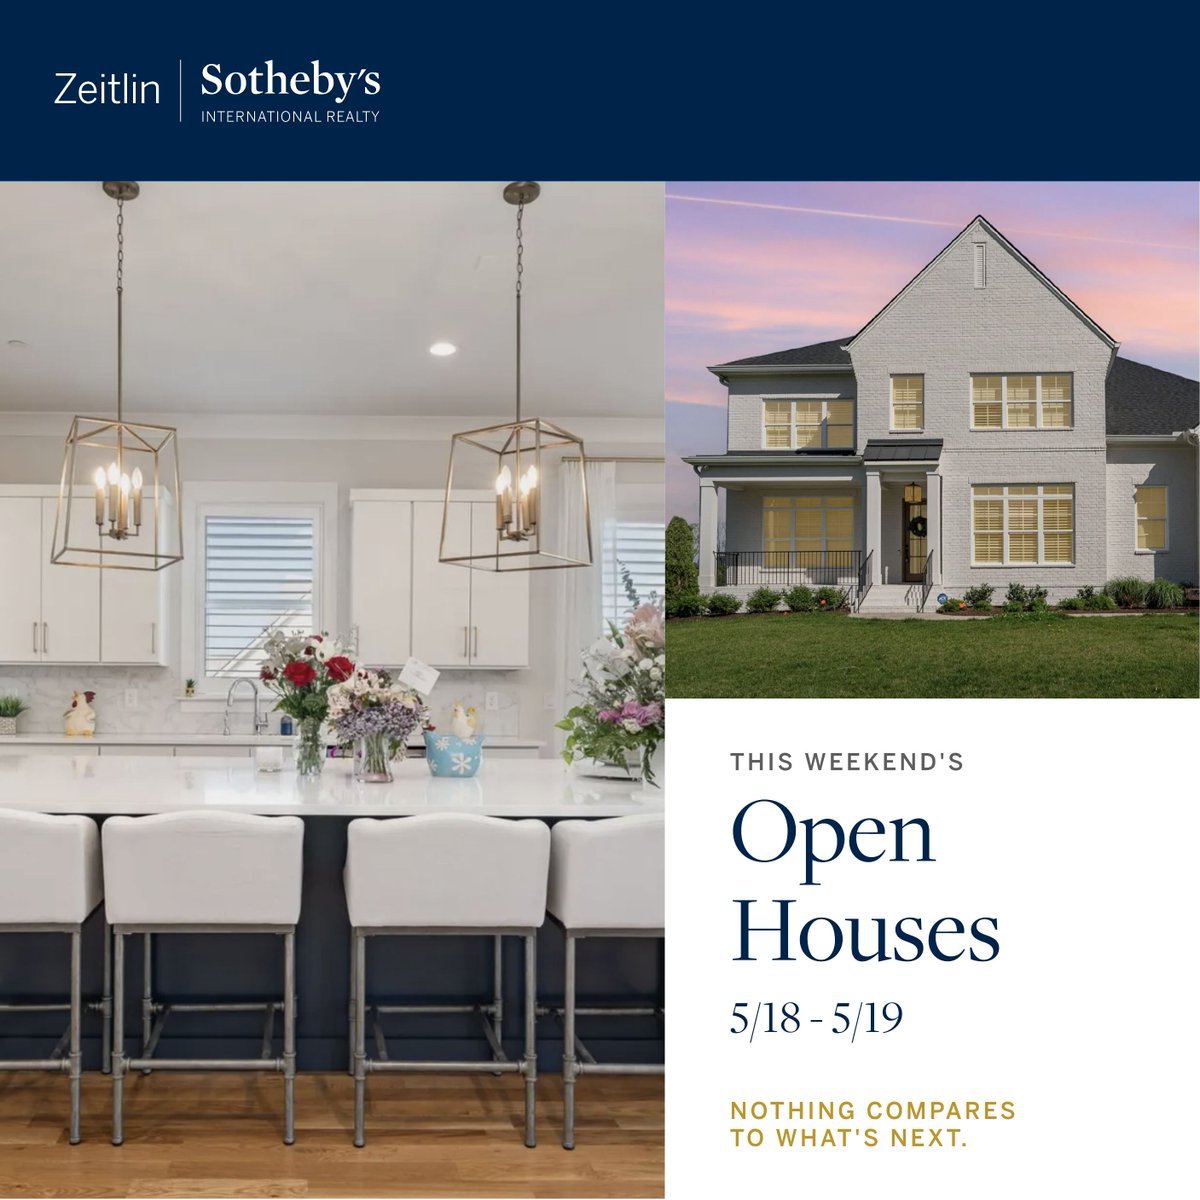 Explore condos, craftsmen, and a multitude of extraordinary properties at this weekend's open houses.

buff.ly/37yG9lY

#zeitlinsir #zsir #tennessee #sothebysrealty #realestate #luxury #curbappeal #luxuryrealestate #design #home #homedesign #architecture